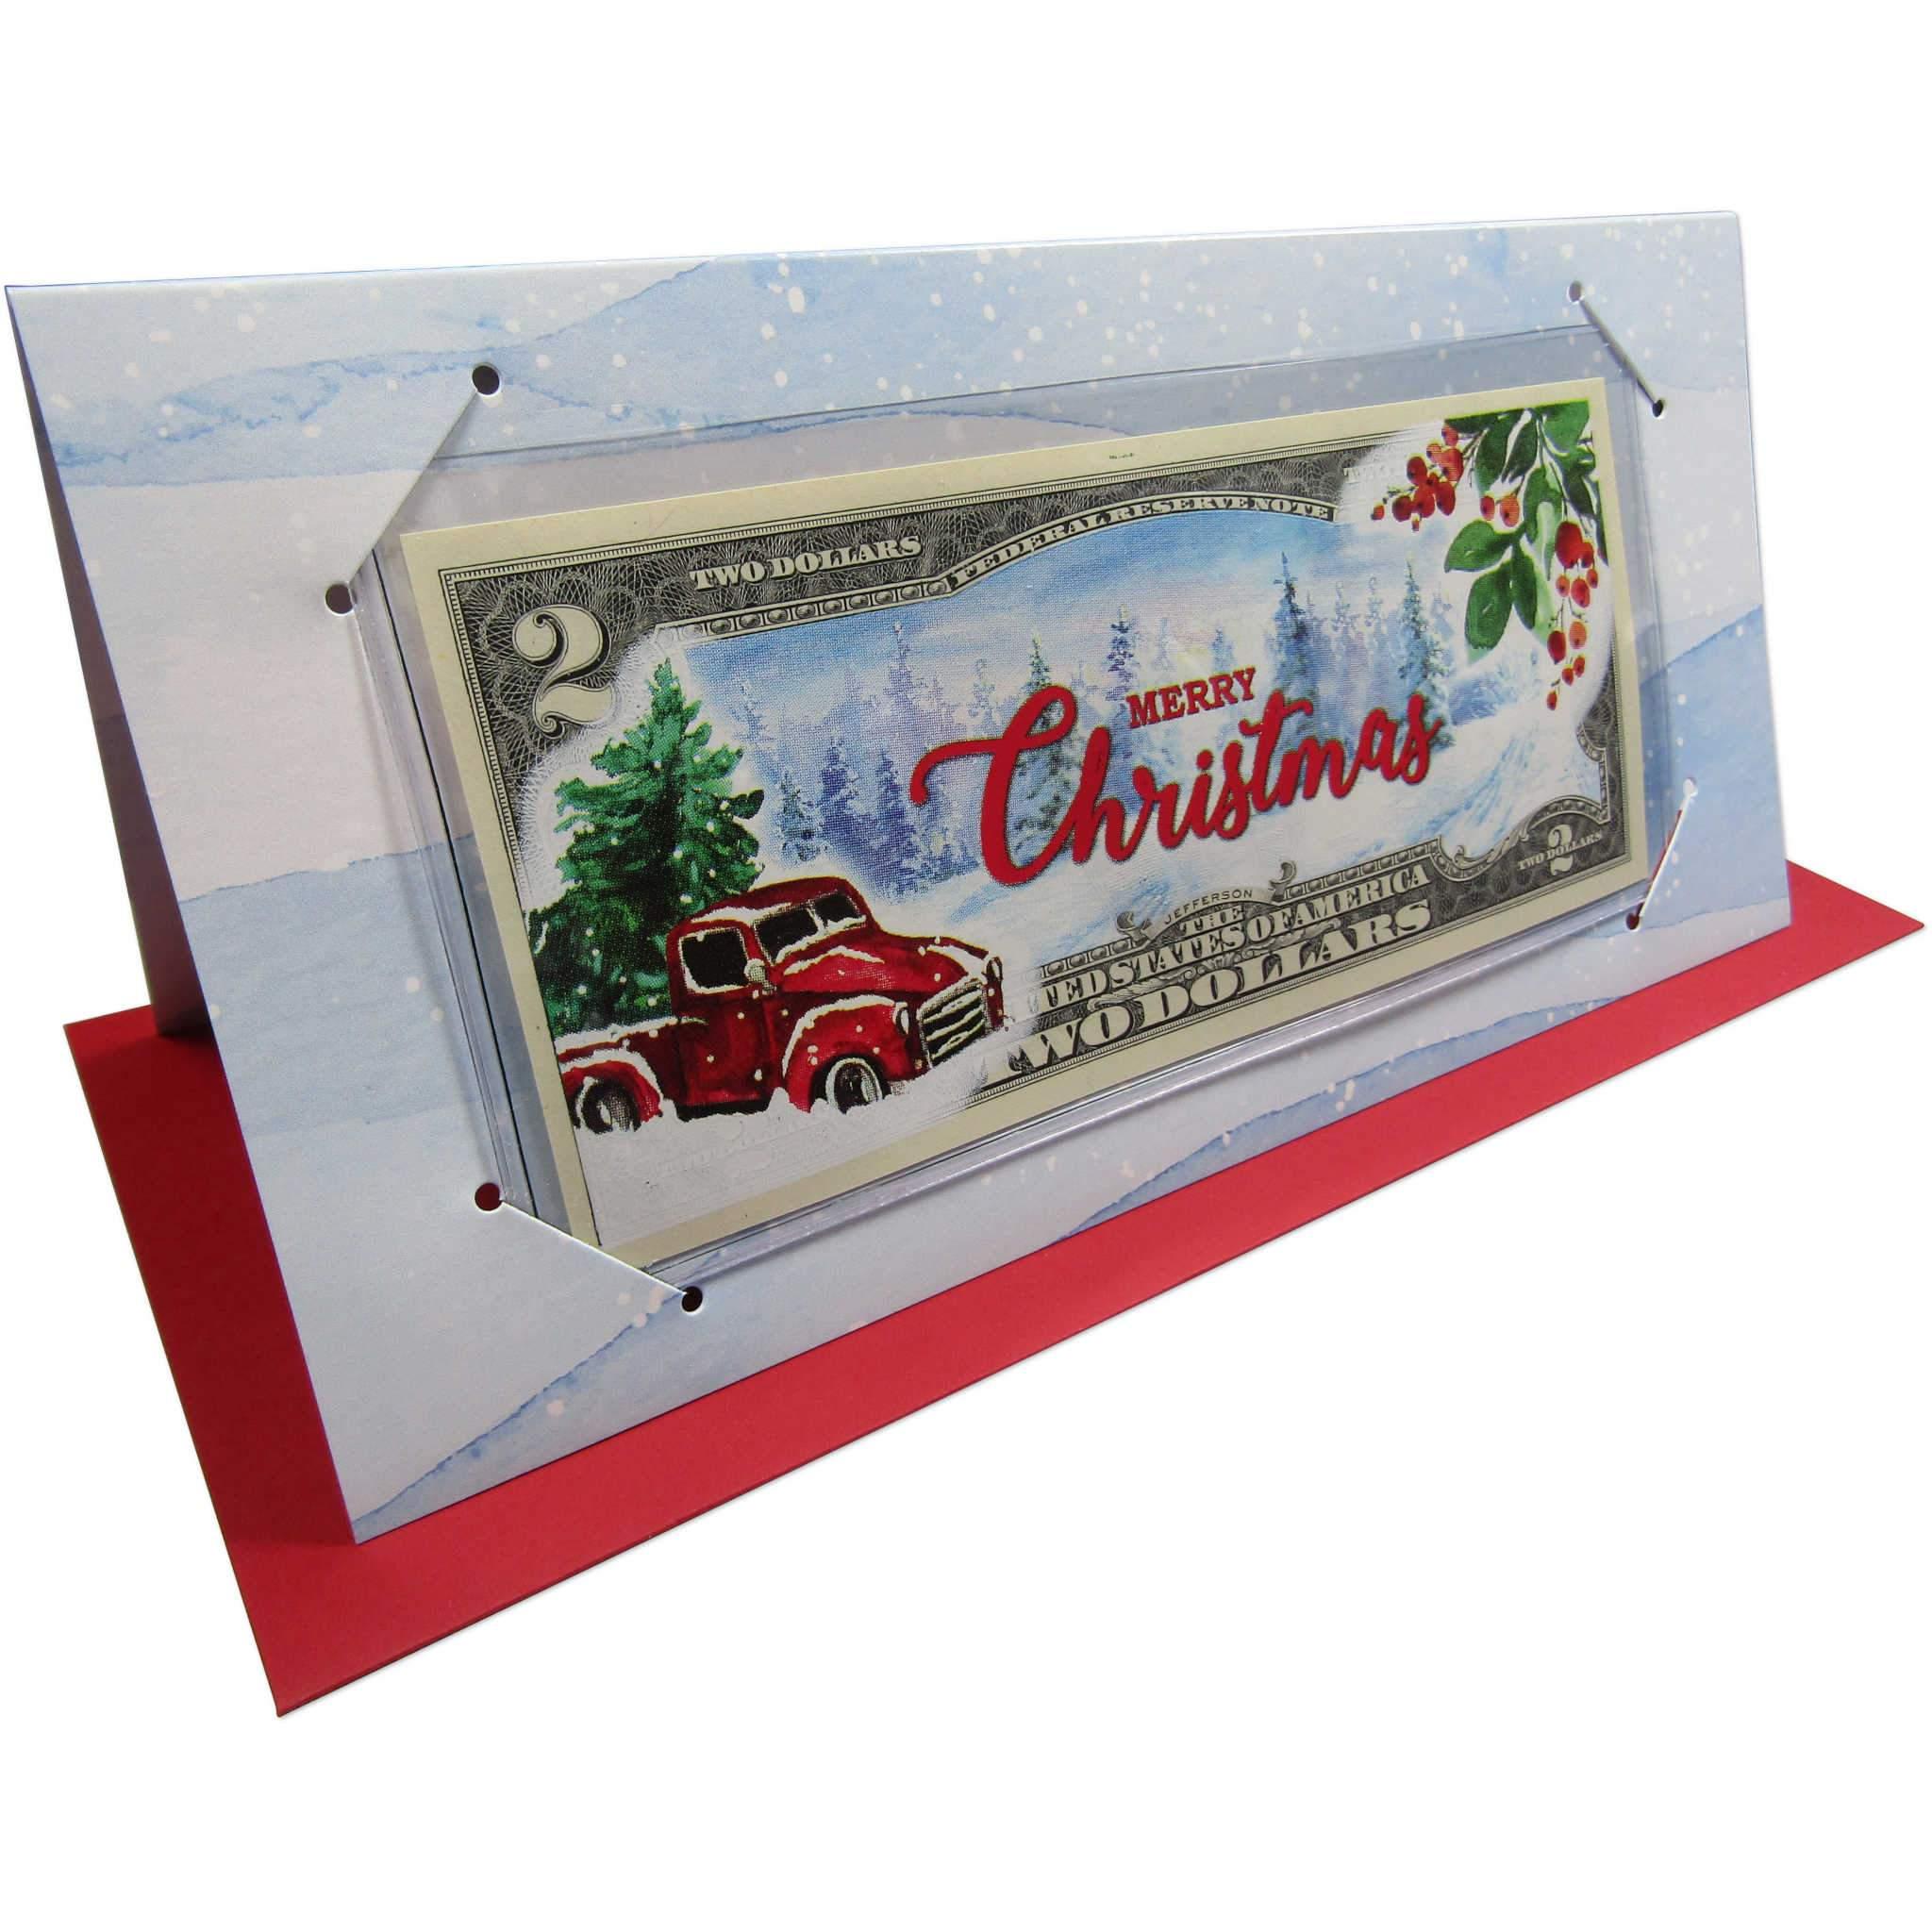 Colorized $2 Note Merry Christmas Card Red Truck Federal Reserve Small Size